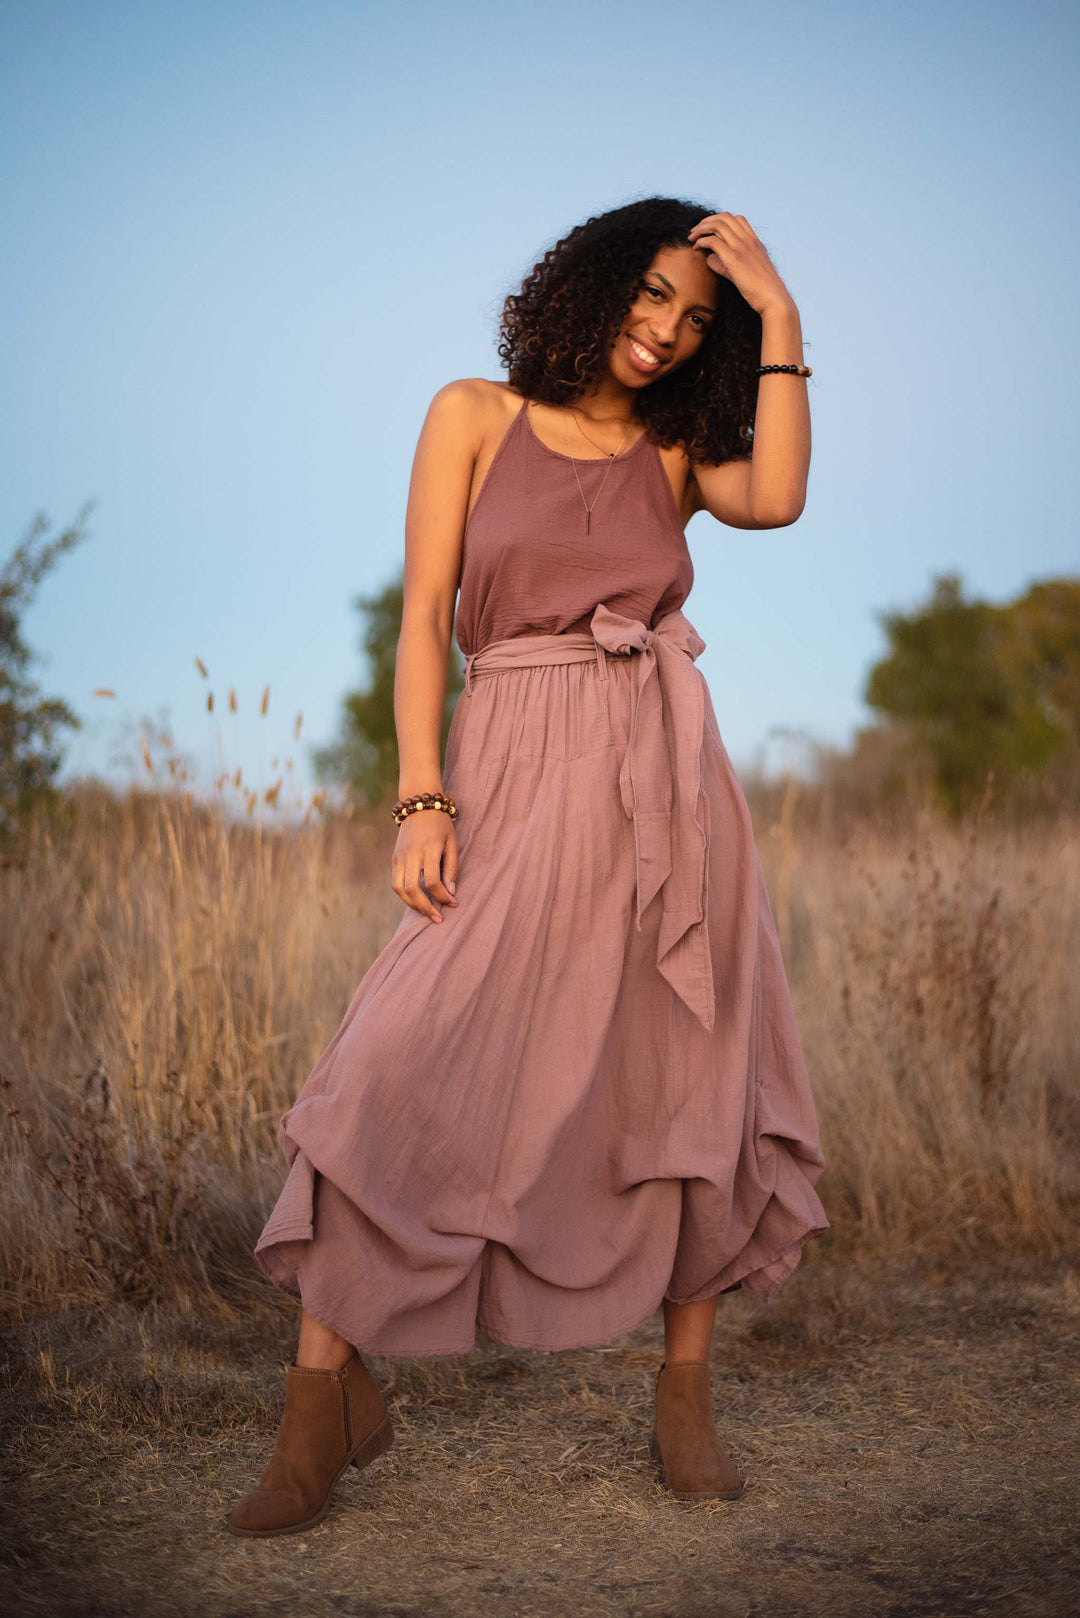 Female model with curly dark hair stands outside. Her left hand is on her head and she is smiling. She wears a rose-color tank top and long tiered skirt with ankle-heigh brown boots.